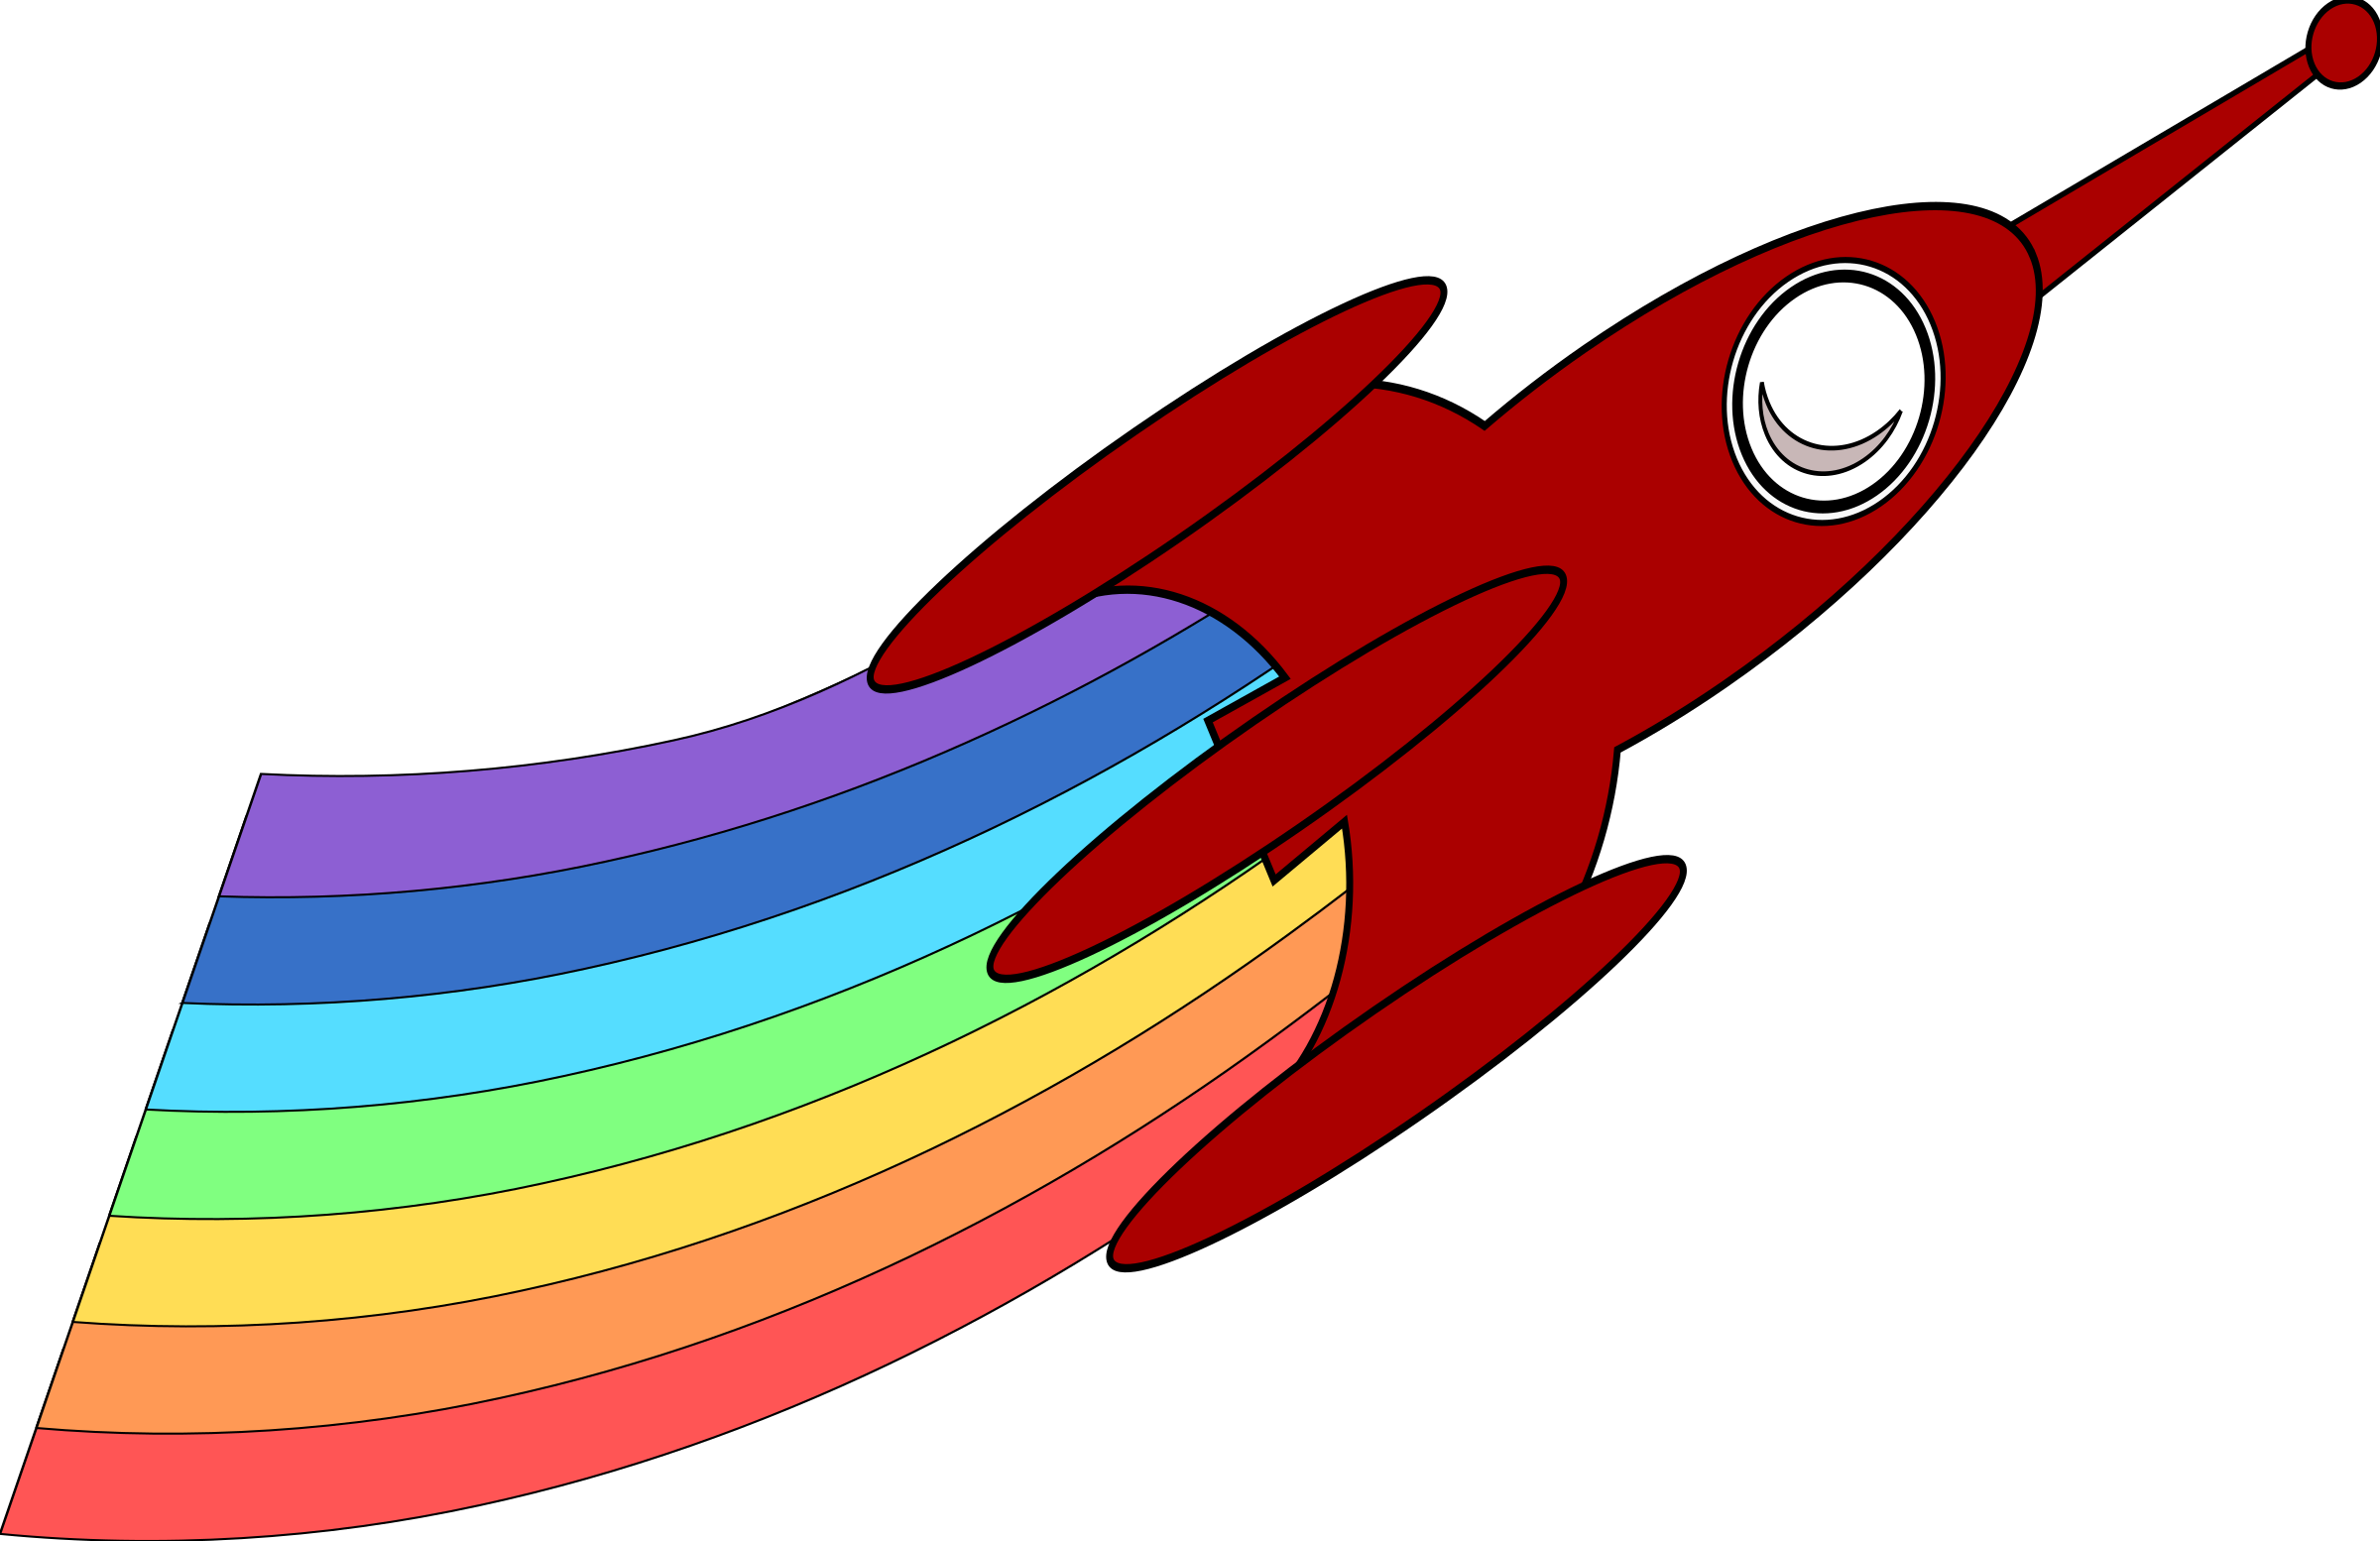 Rocket - Scalable Vector Graphics (2400x1554)